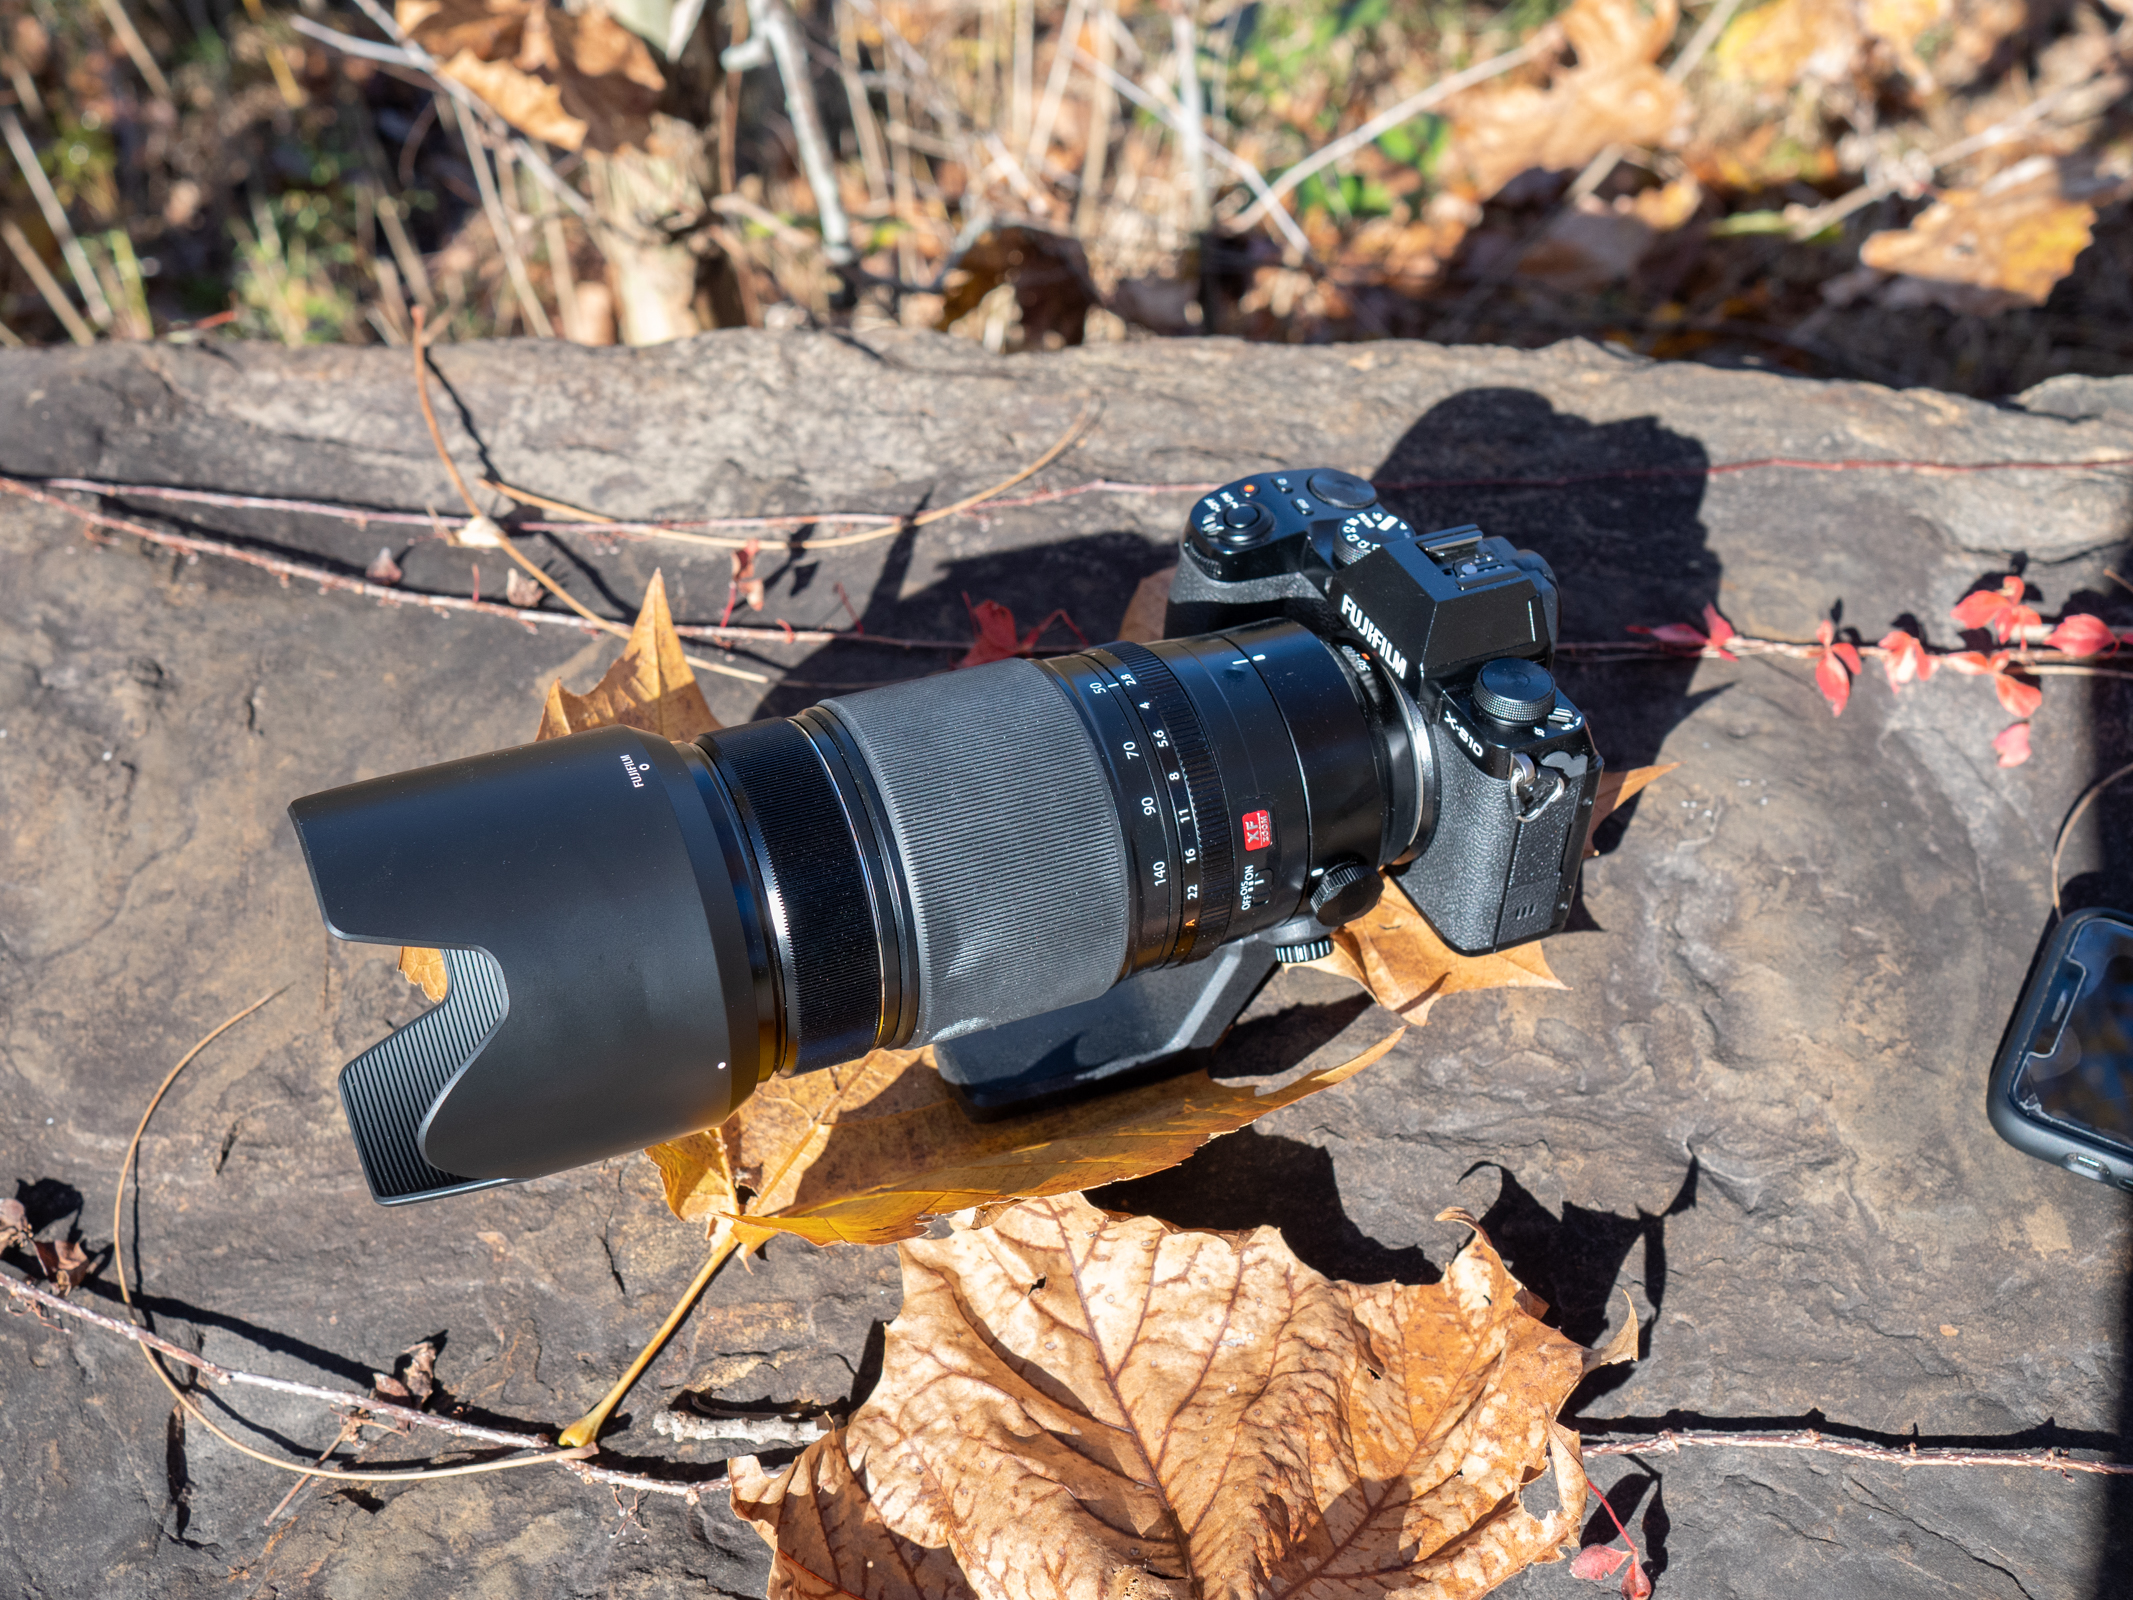 Fujifilm XF 50-140mm F/2.8 review: A stunning prime-like telephoto